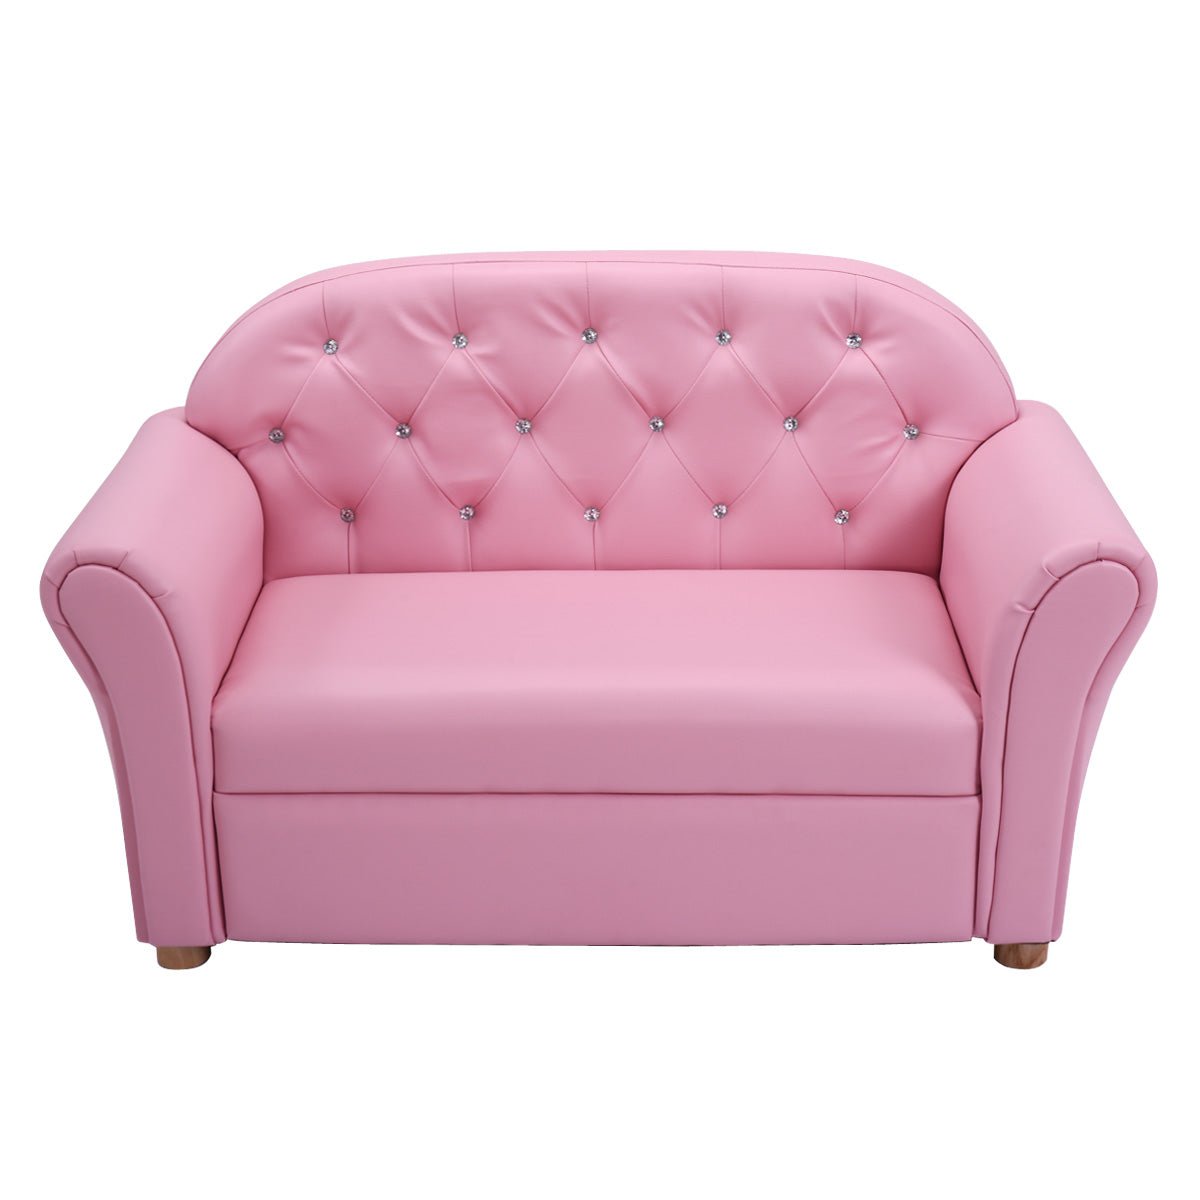 Children's Armrest Sofa Chair: PVC Leather, Cozy Seating for Kids